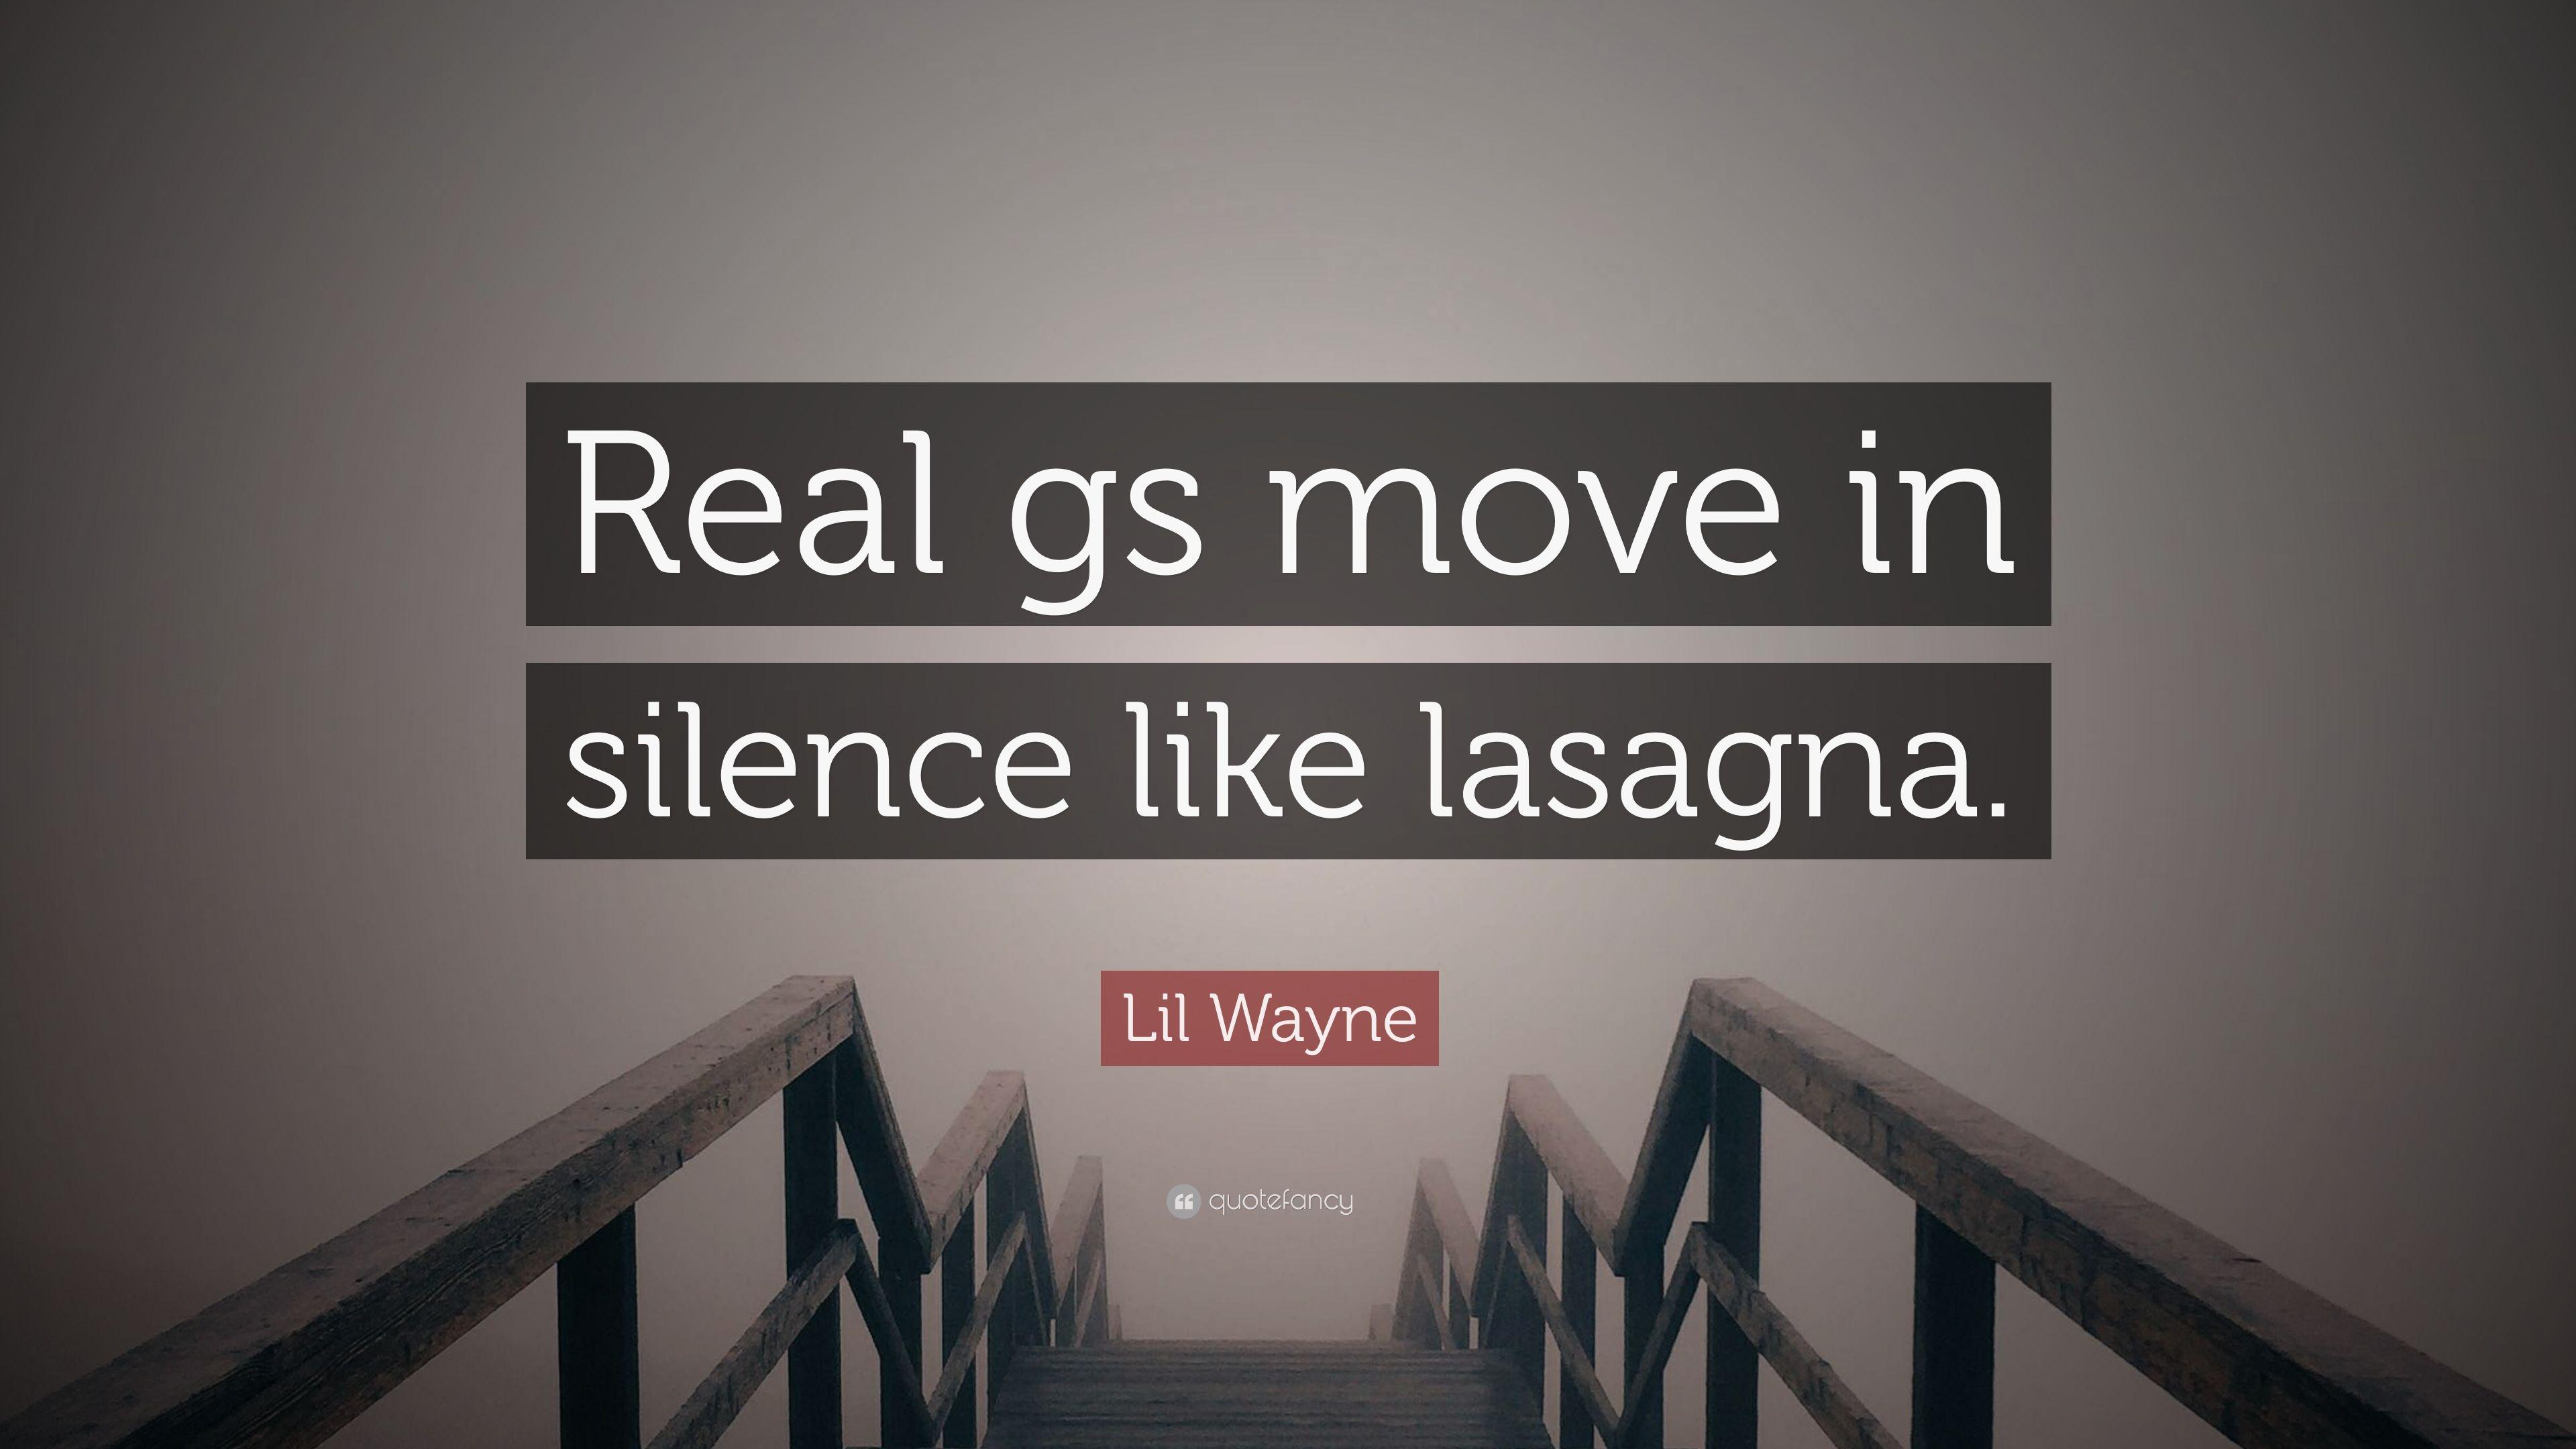 Lil Wayne Quote: “Real gs move in silence like lasagna.” 12